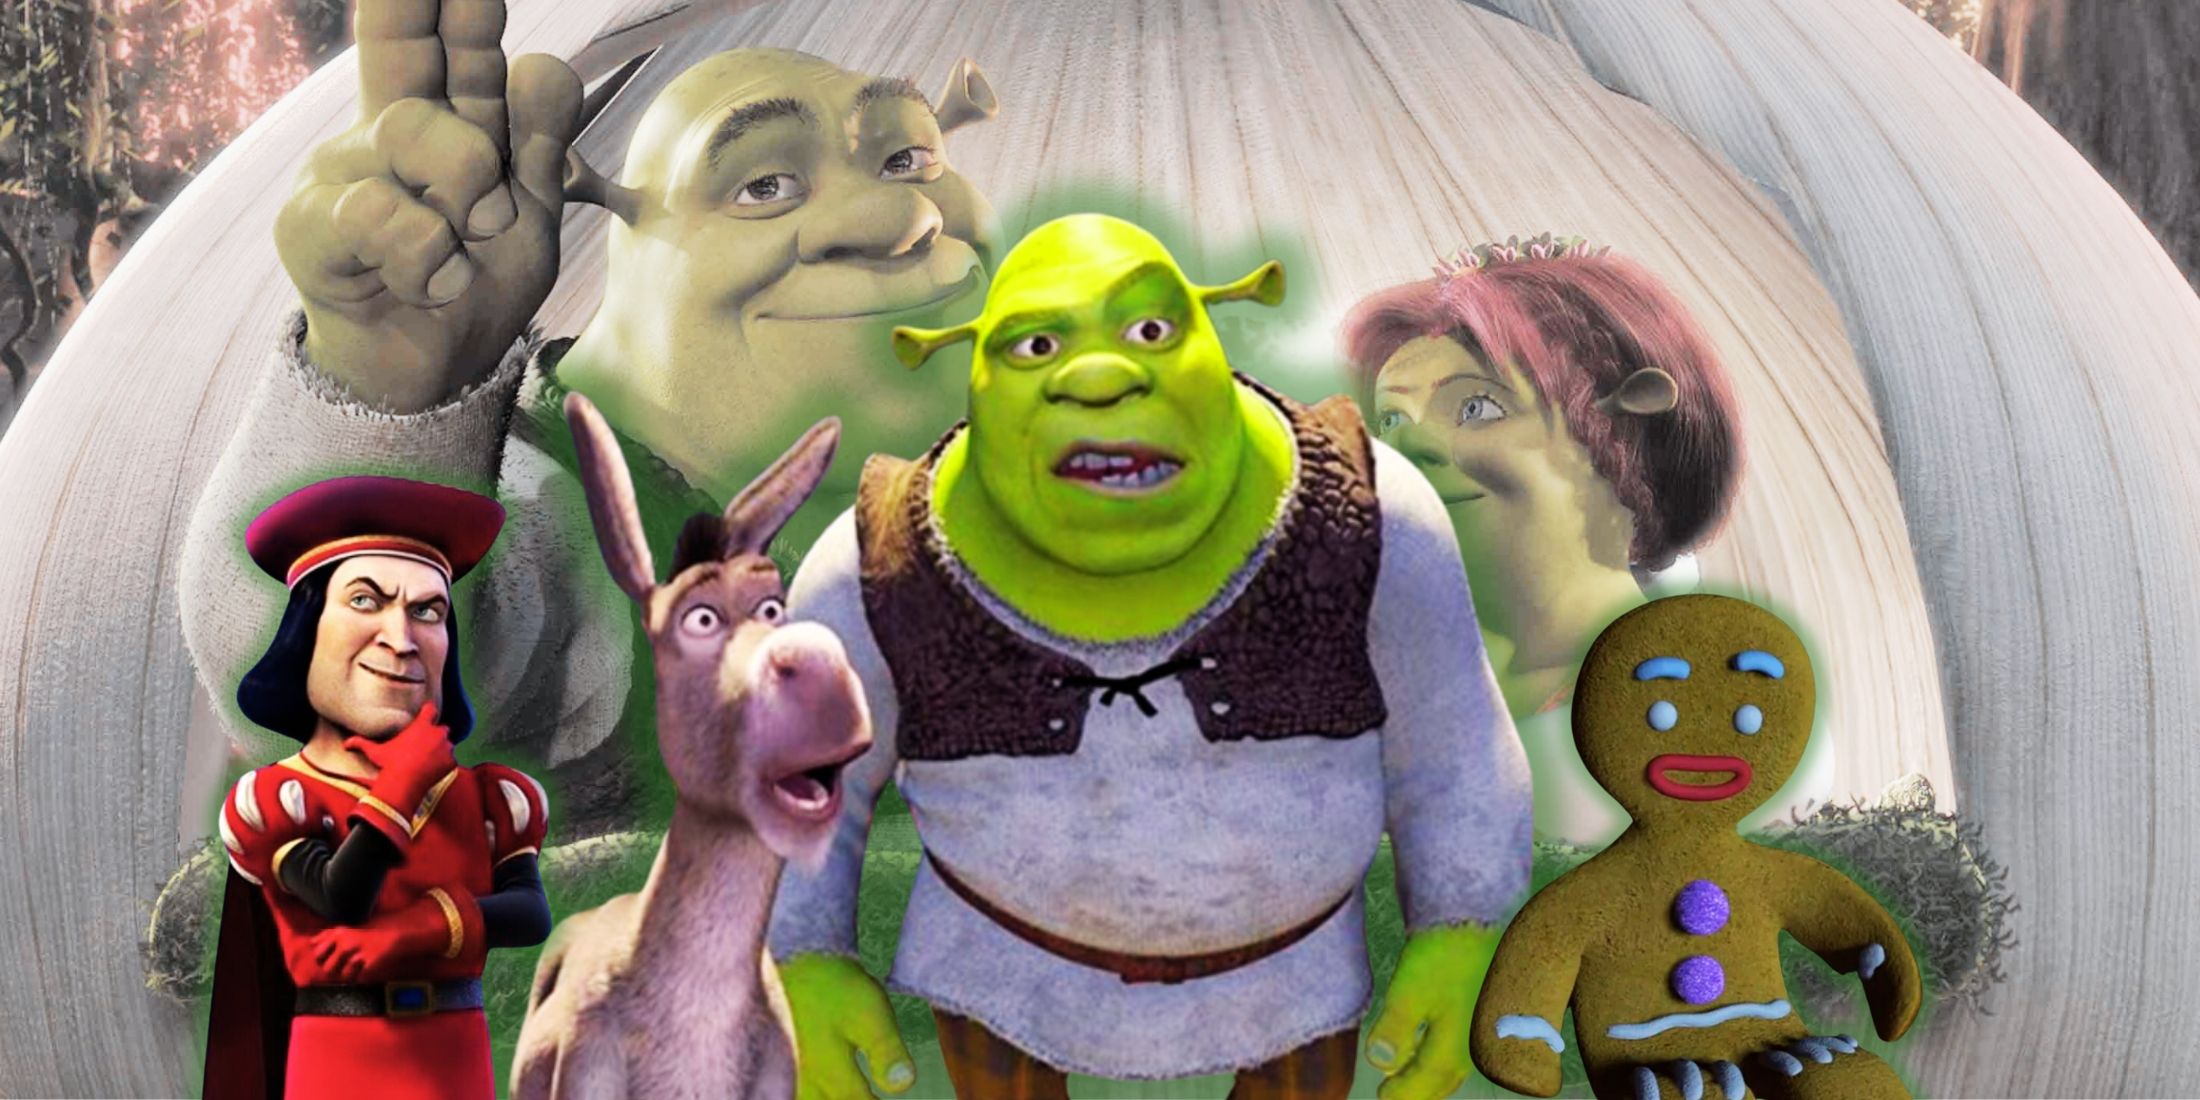 Shrek characters Farquaad, Donkey, Shrek, and Gingy appear over an image of Shrek and Fiona in their onion coach